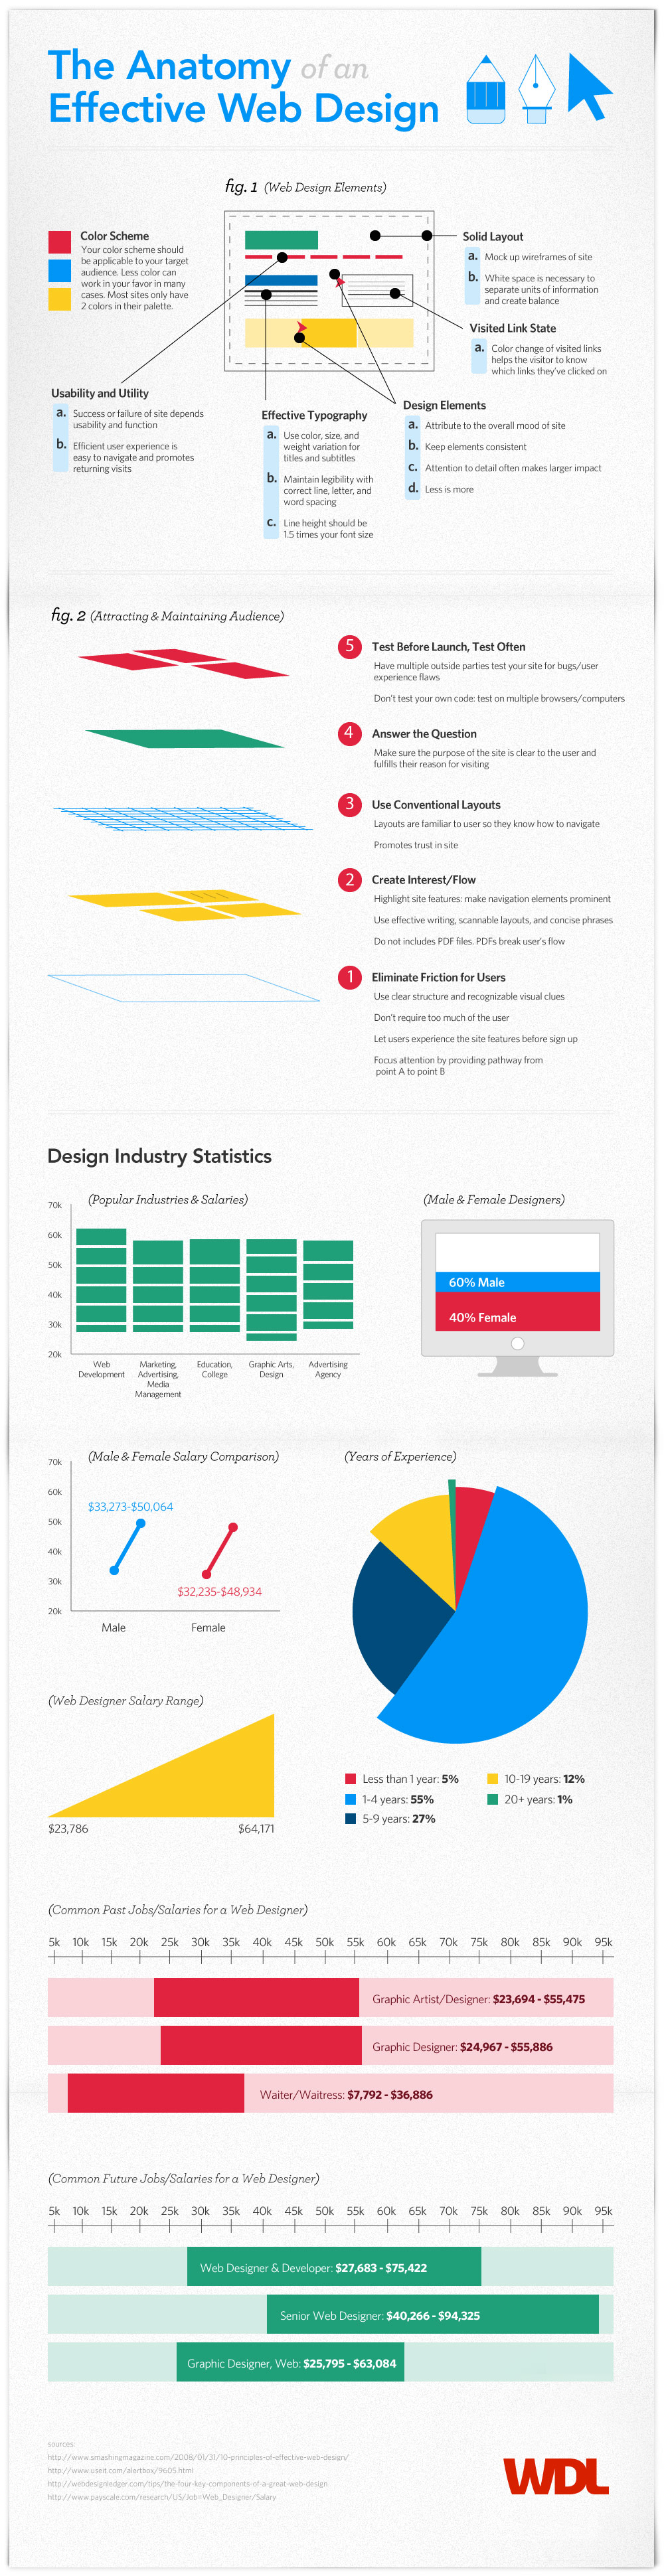 The Anatomy of an Effective Web Design Infographic